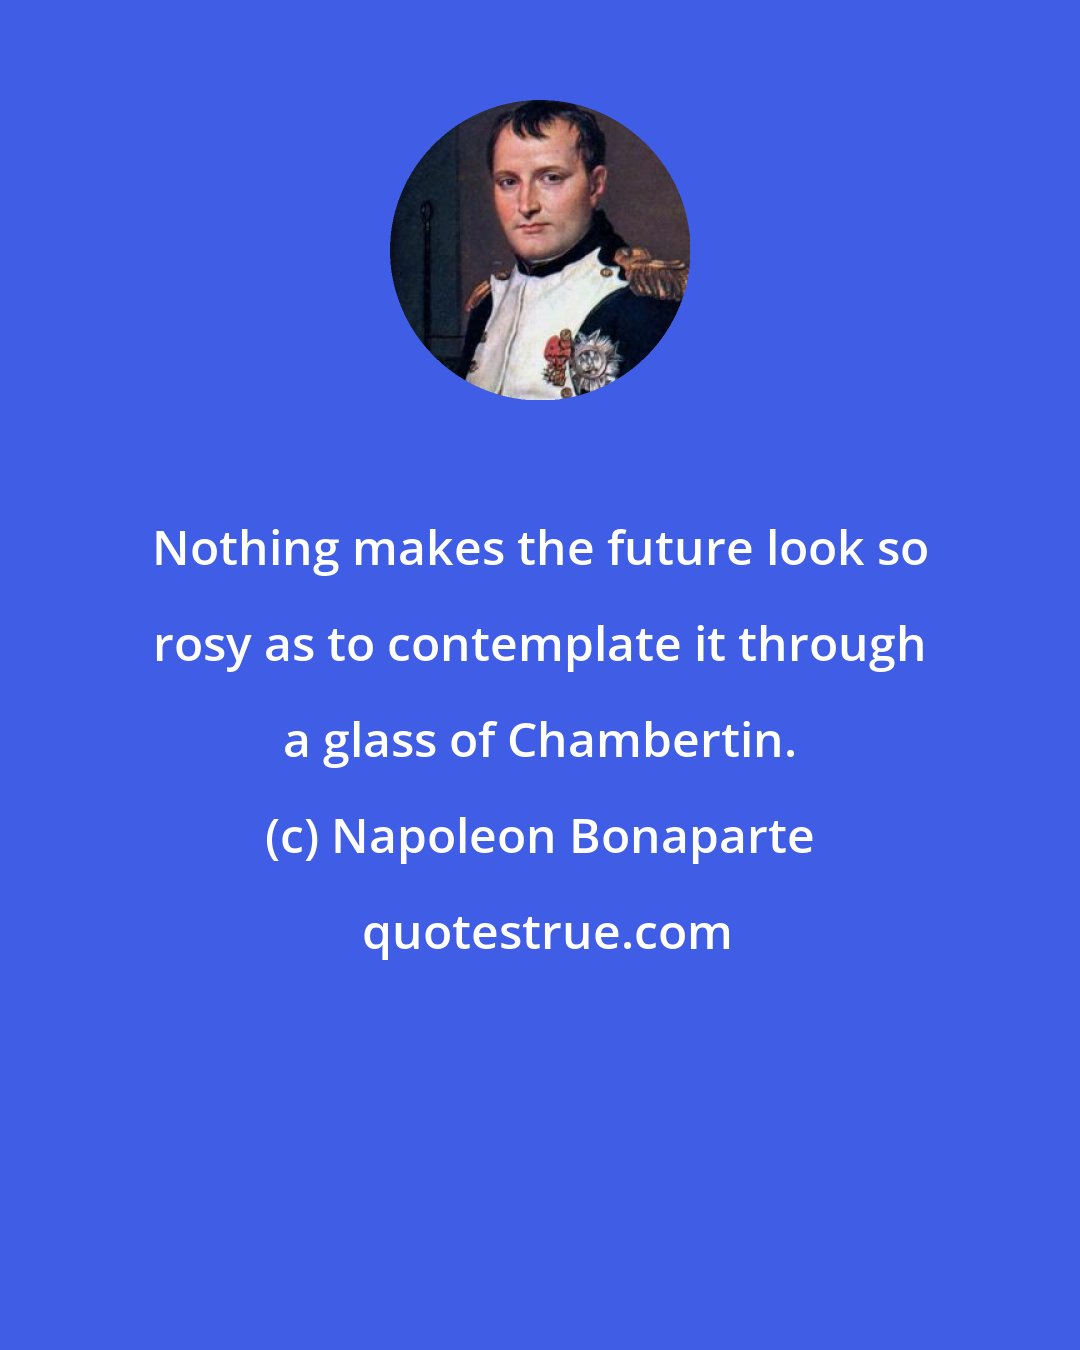 Napoleon Bonaparte: Nothing makes the future look so rosy as to contemplate it through a glass of Chambertin.